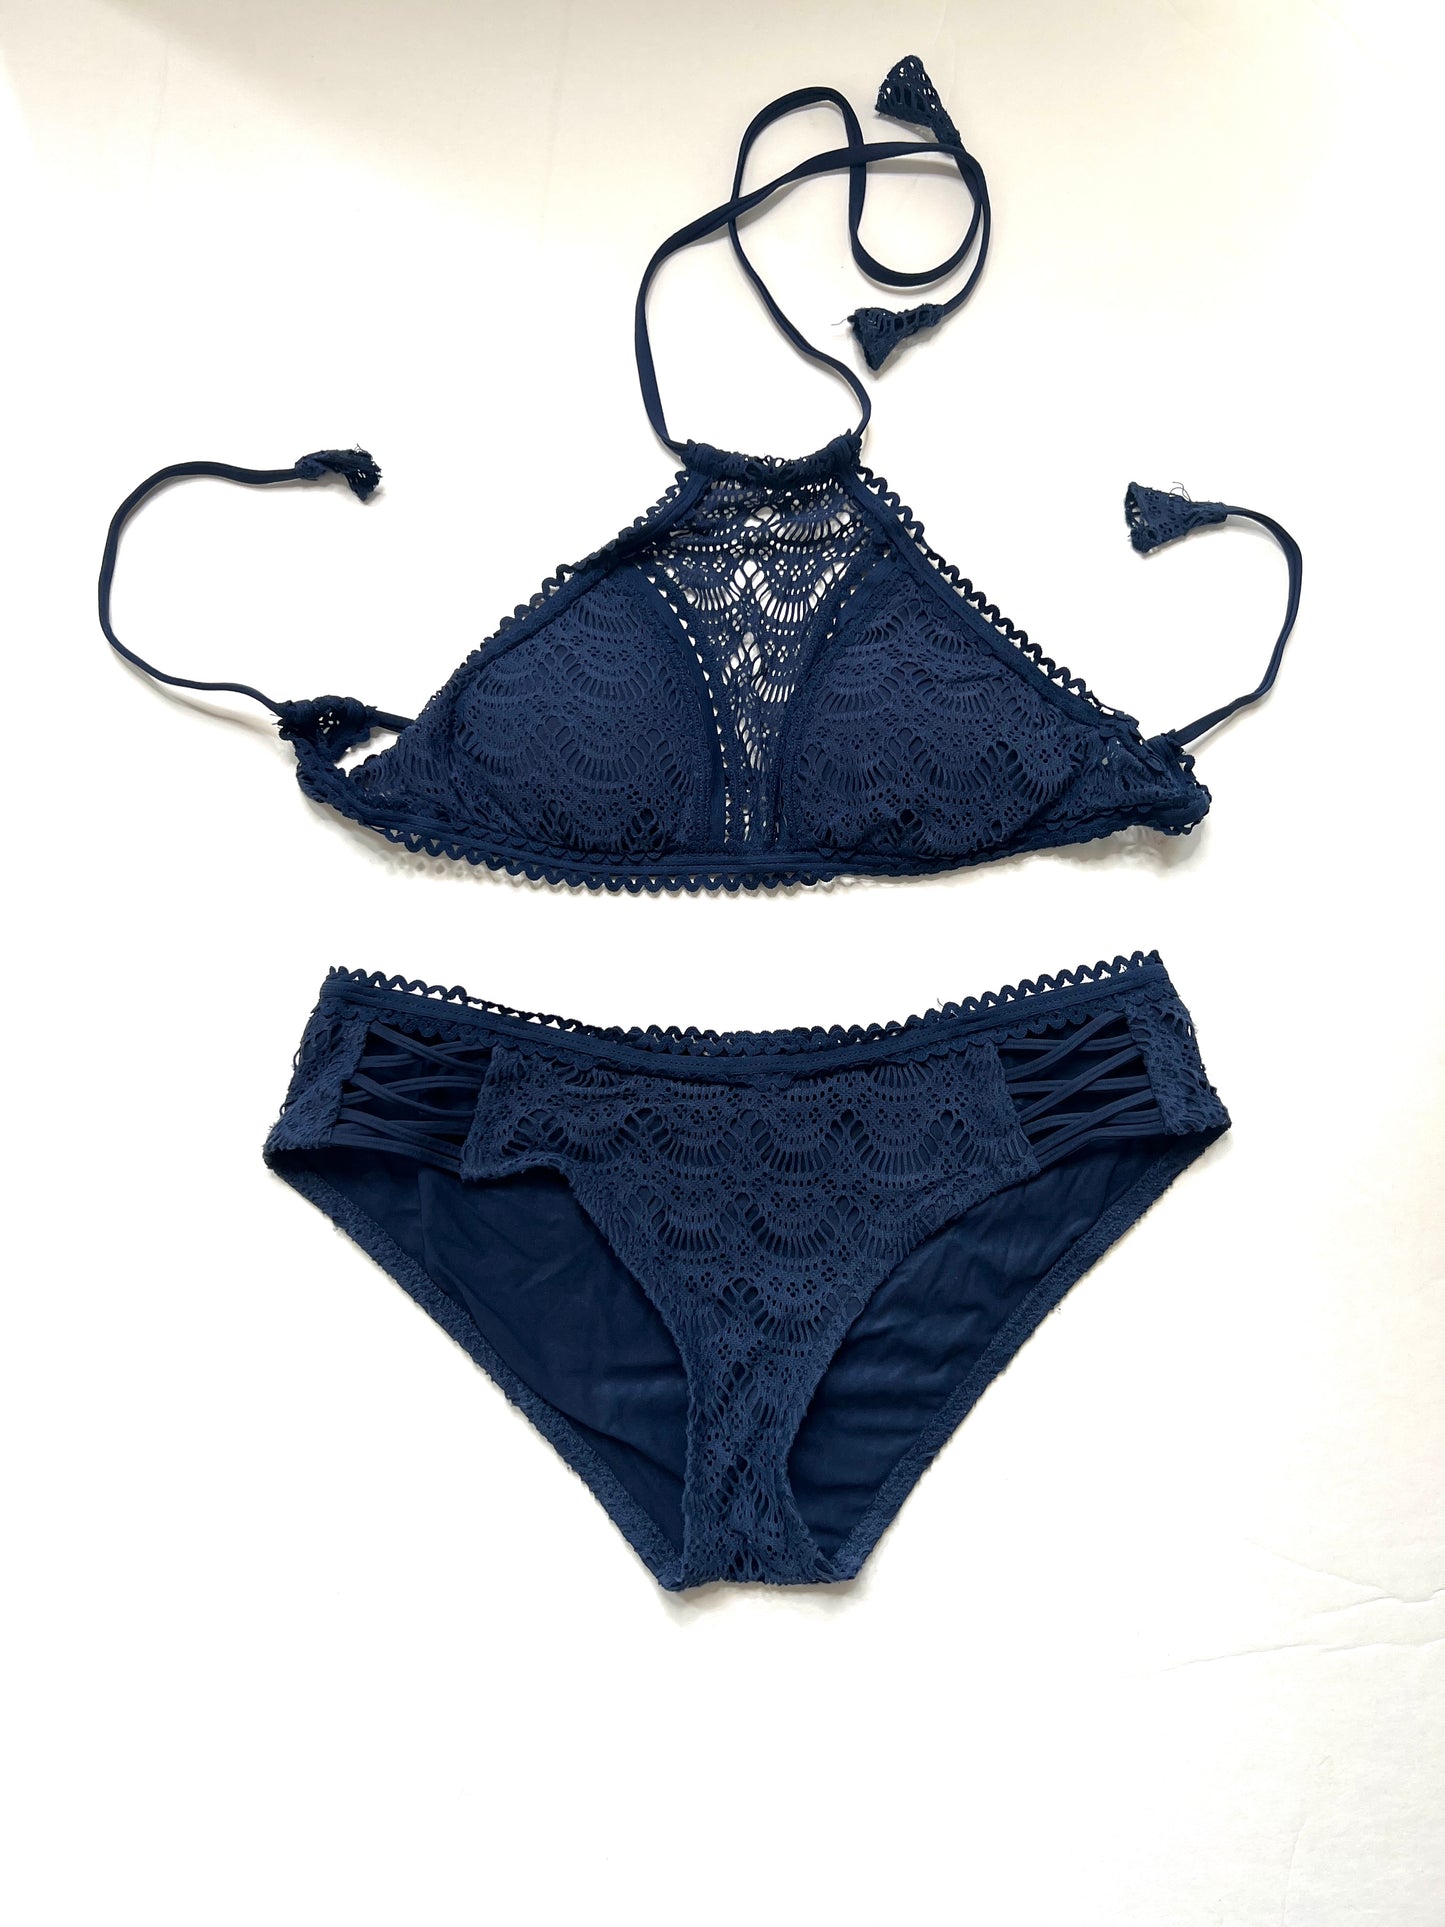 Women's Becca Bikini Size L (bottom tagged L, top tag cut out and may be a M)